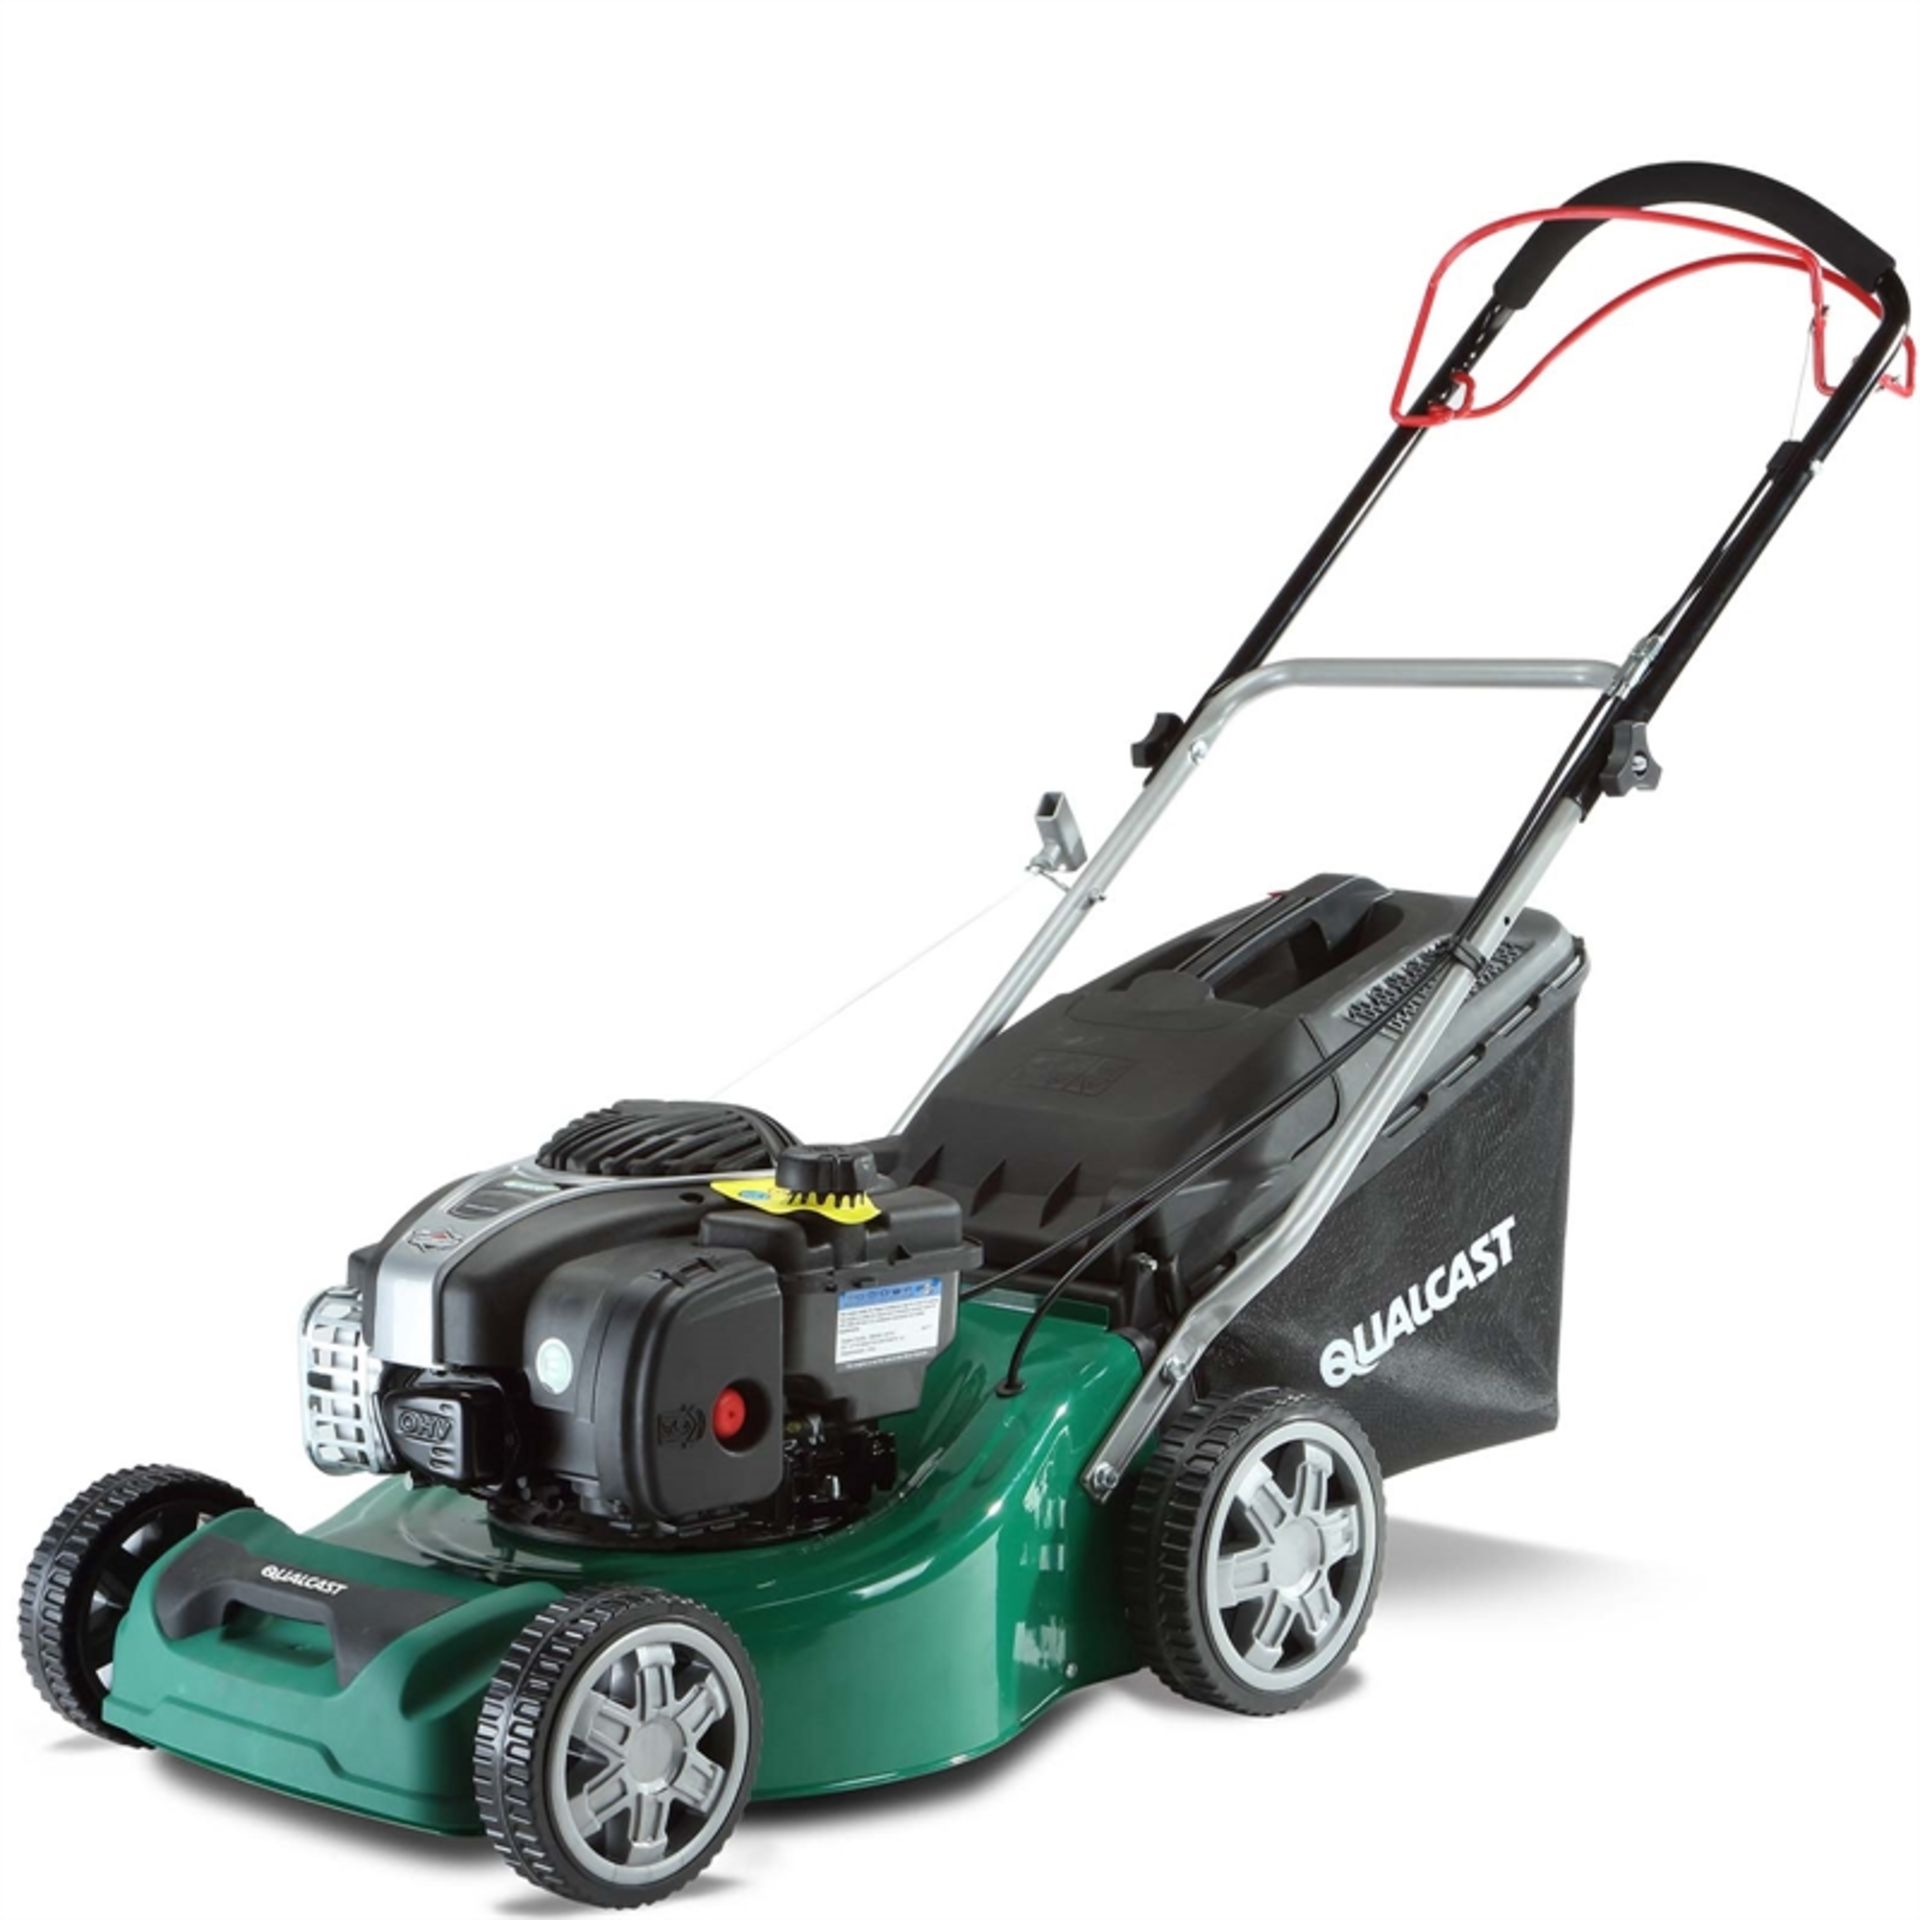 V Brand New Qualcast SPP41 125cc Self Propelled Petrol Rotary Lawn Mower 41cm - 45Ltr Collect Volume